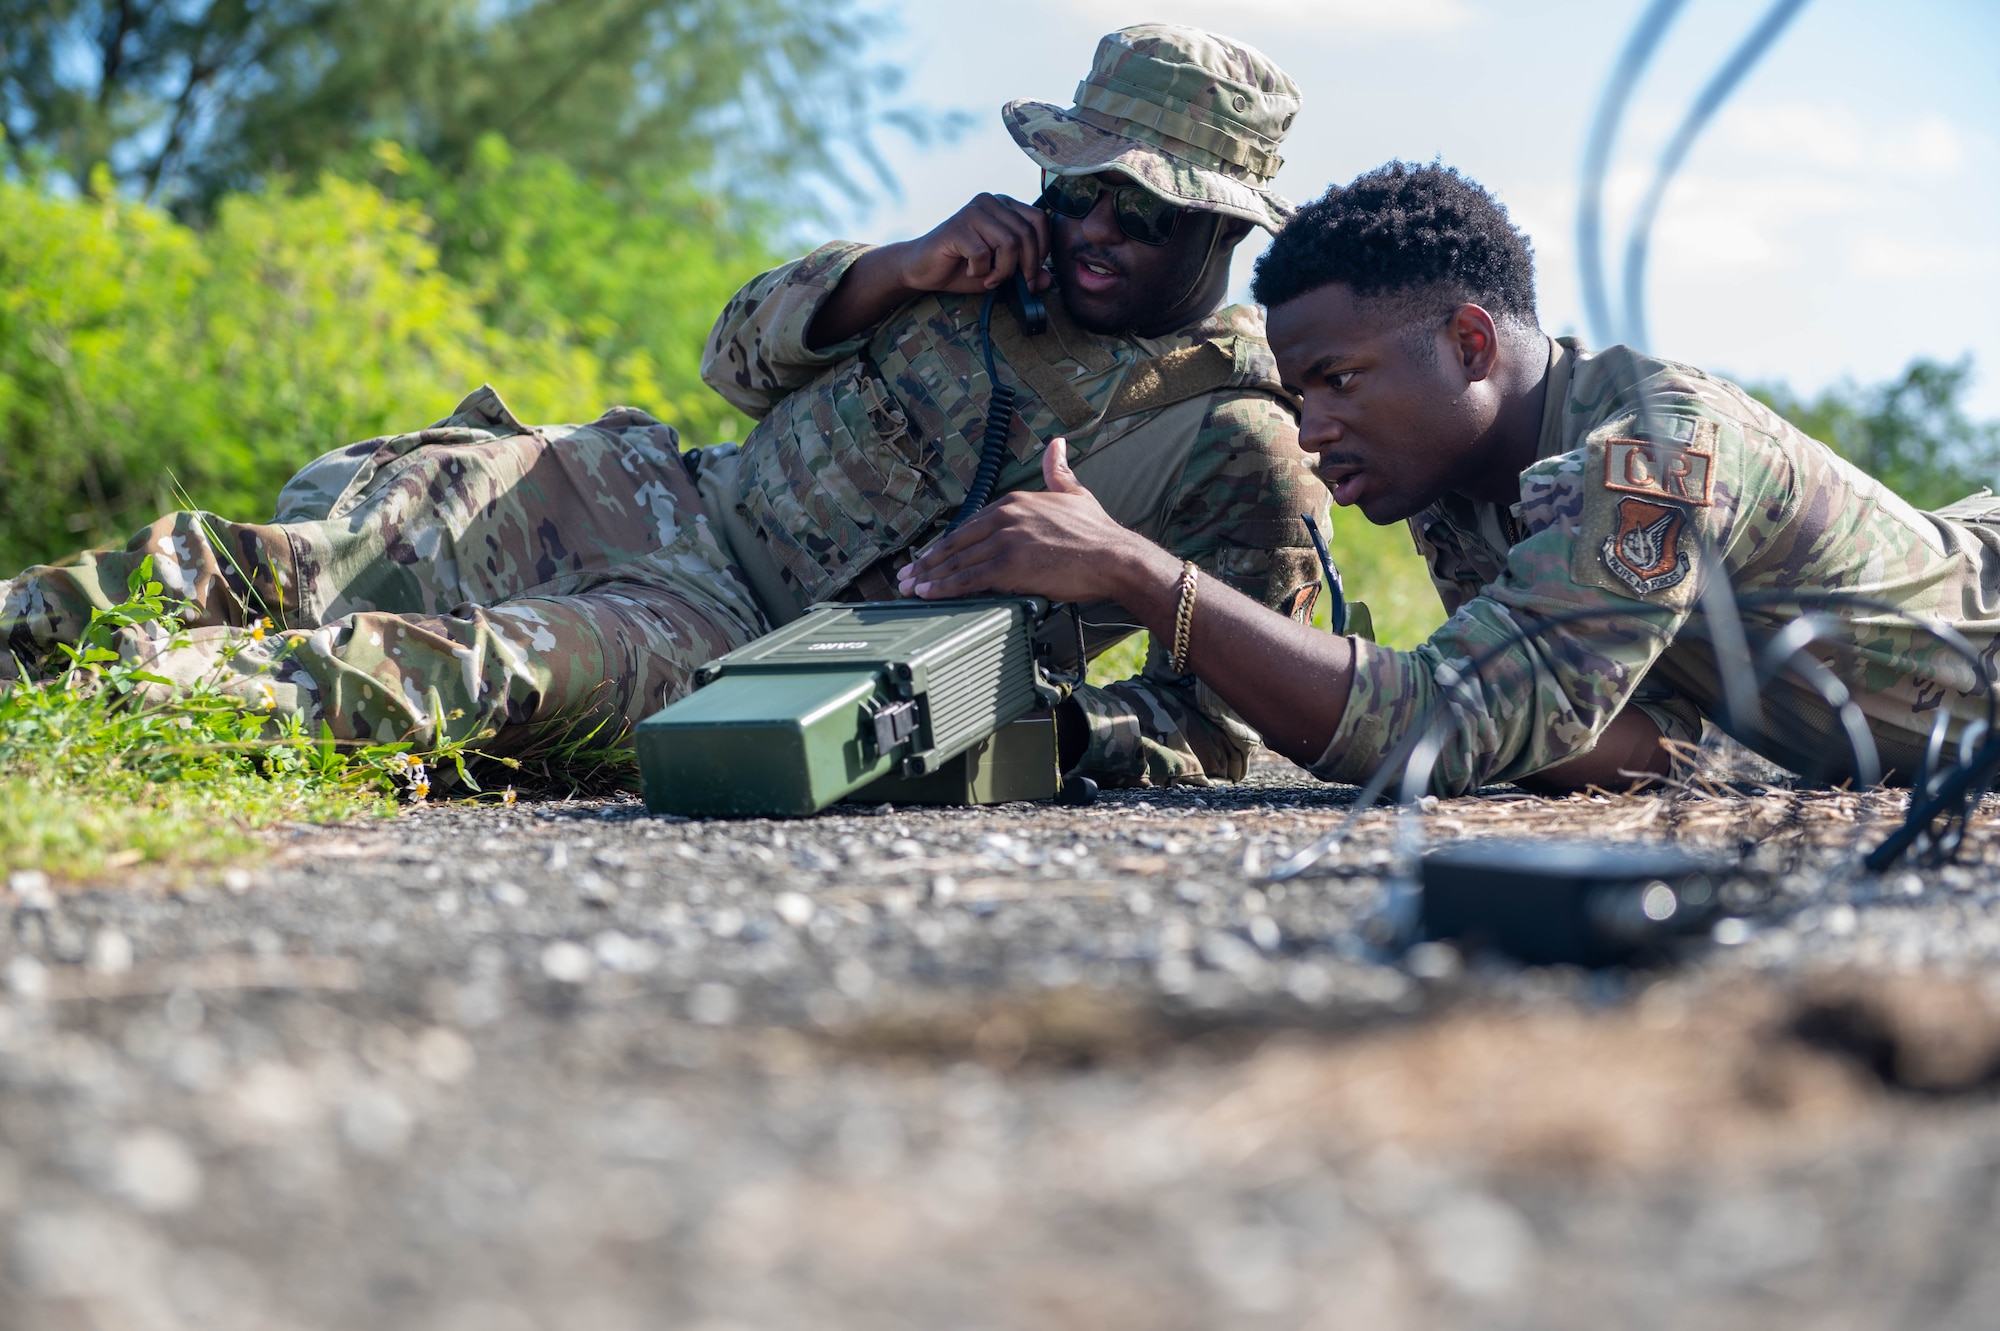 U.S. Air Force Staff Sgt. Joshua Fobbs, 644th Combat Communications Squadron RF Operations Supervisor, and U.S. Air Force Airman 1st Class Jaylen Short, 644th Combat Communication Squadron RF Operations Technician, prepares the radio in preparation to communicate with members from the 644th CBCS on Andersen Air Force Base, Guam, at Tinian, Nov. 14, 2023.